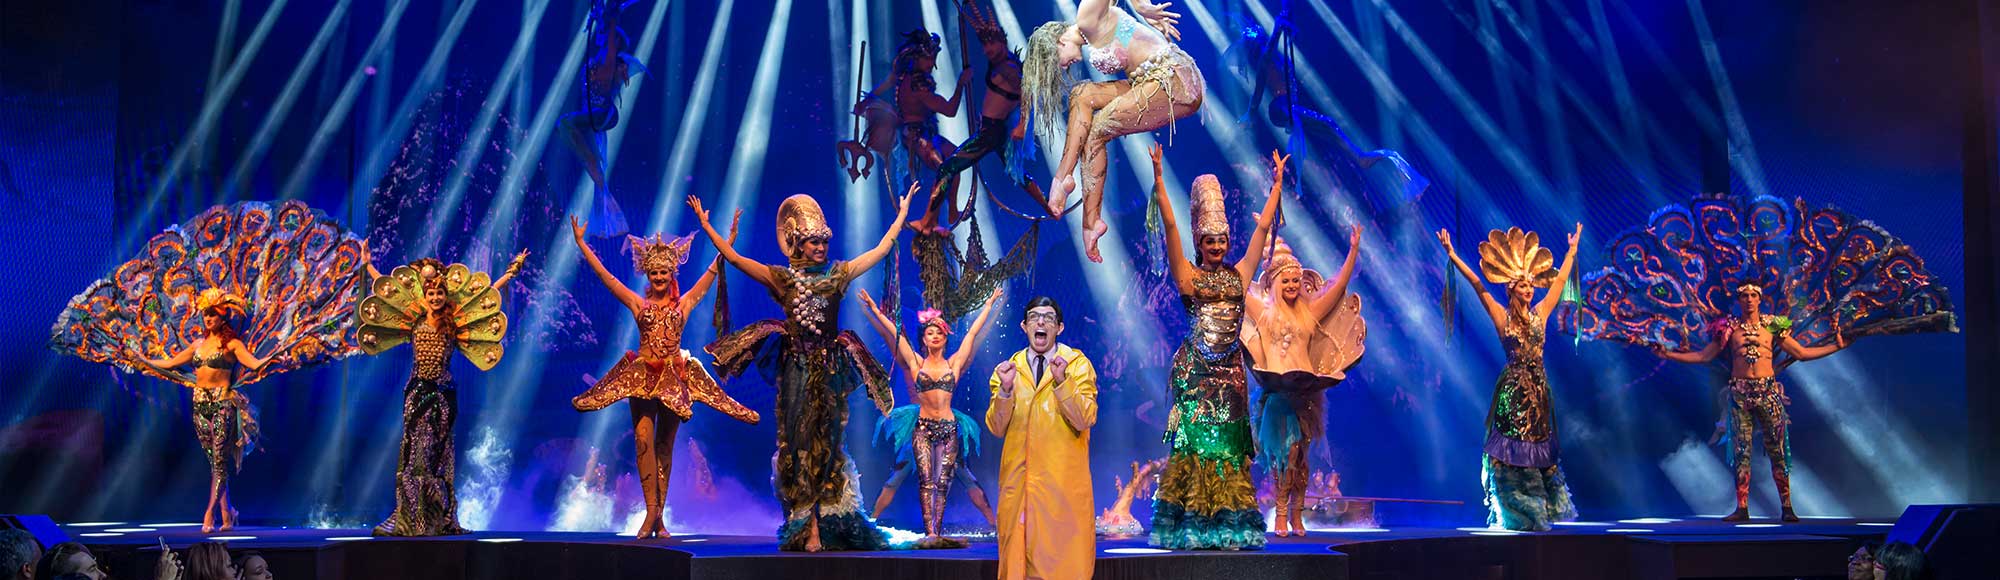 WOW – The Vegas Spectacular show